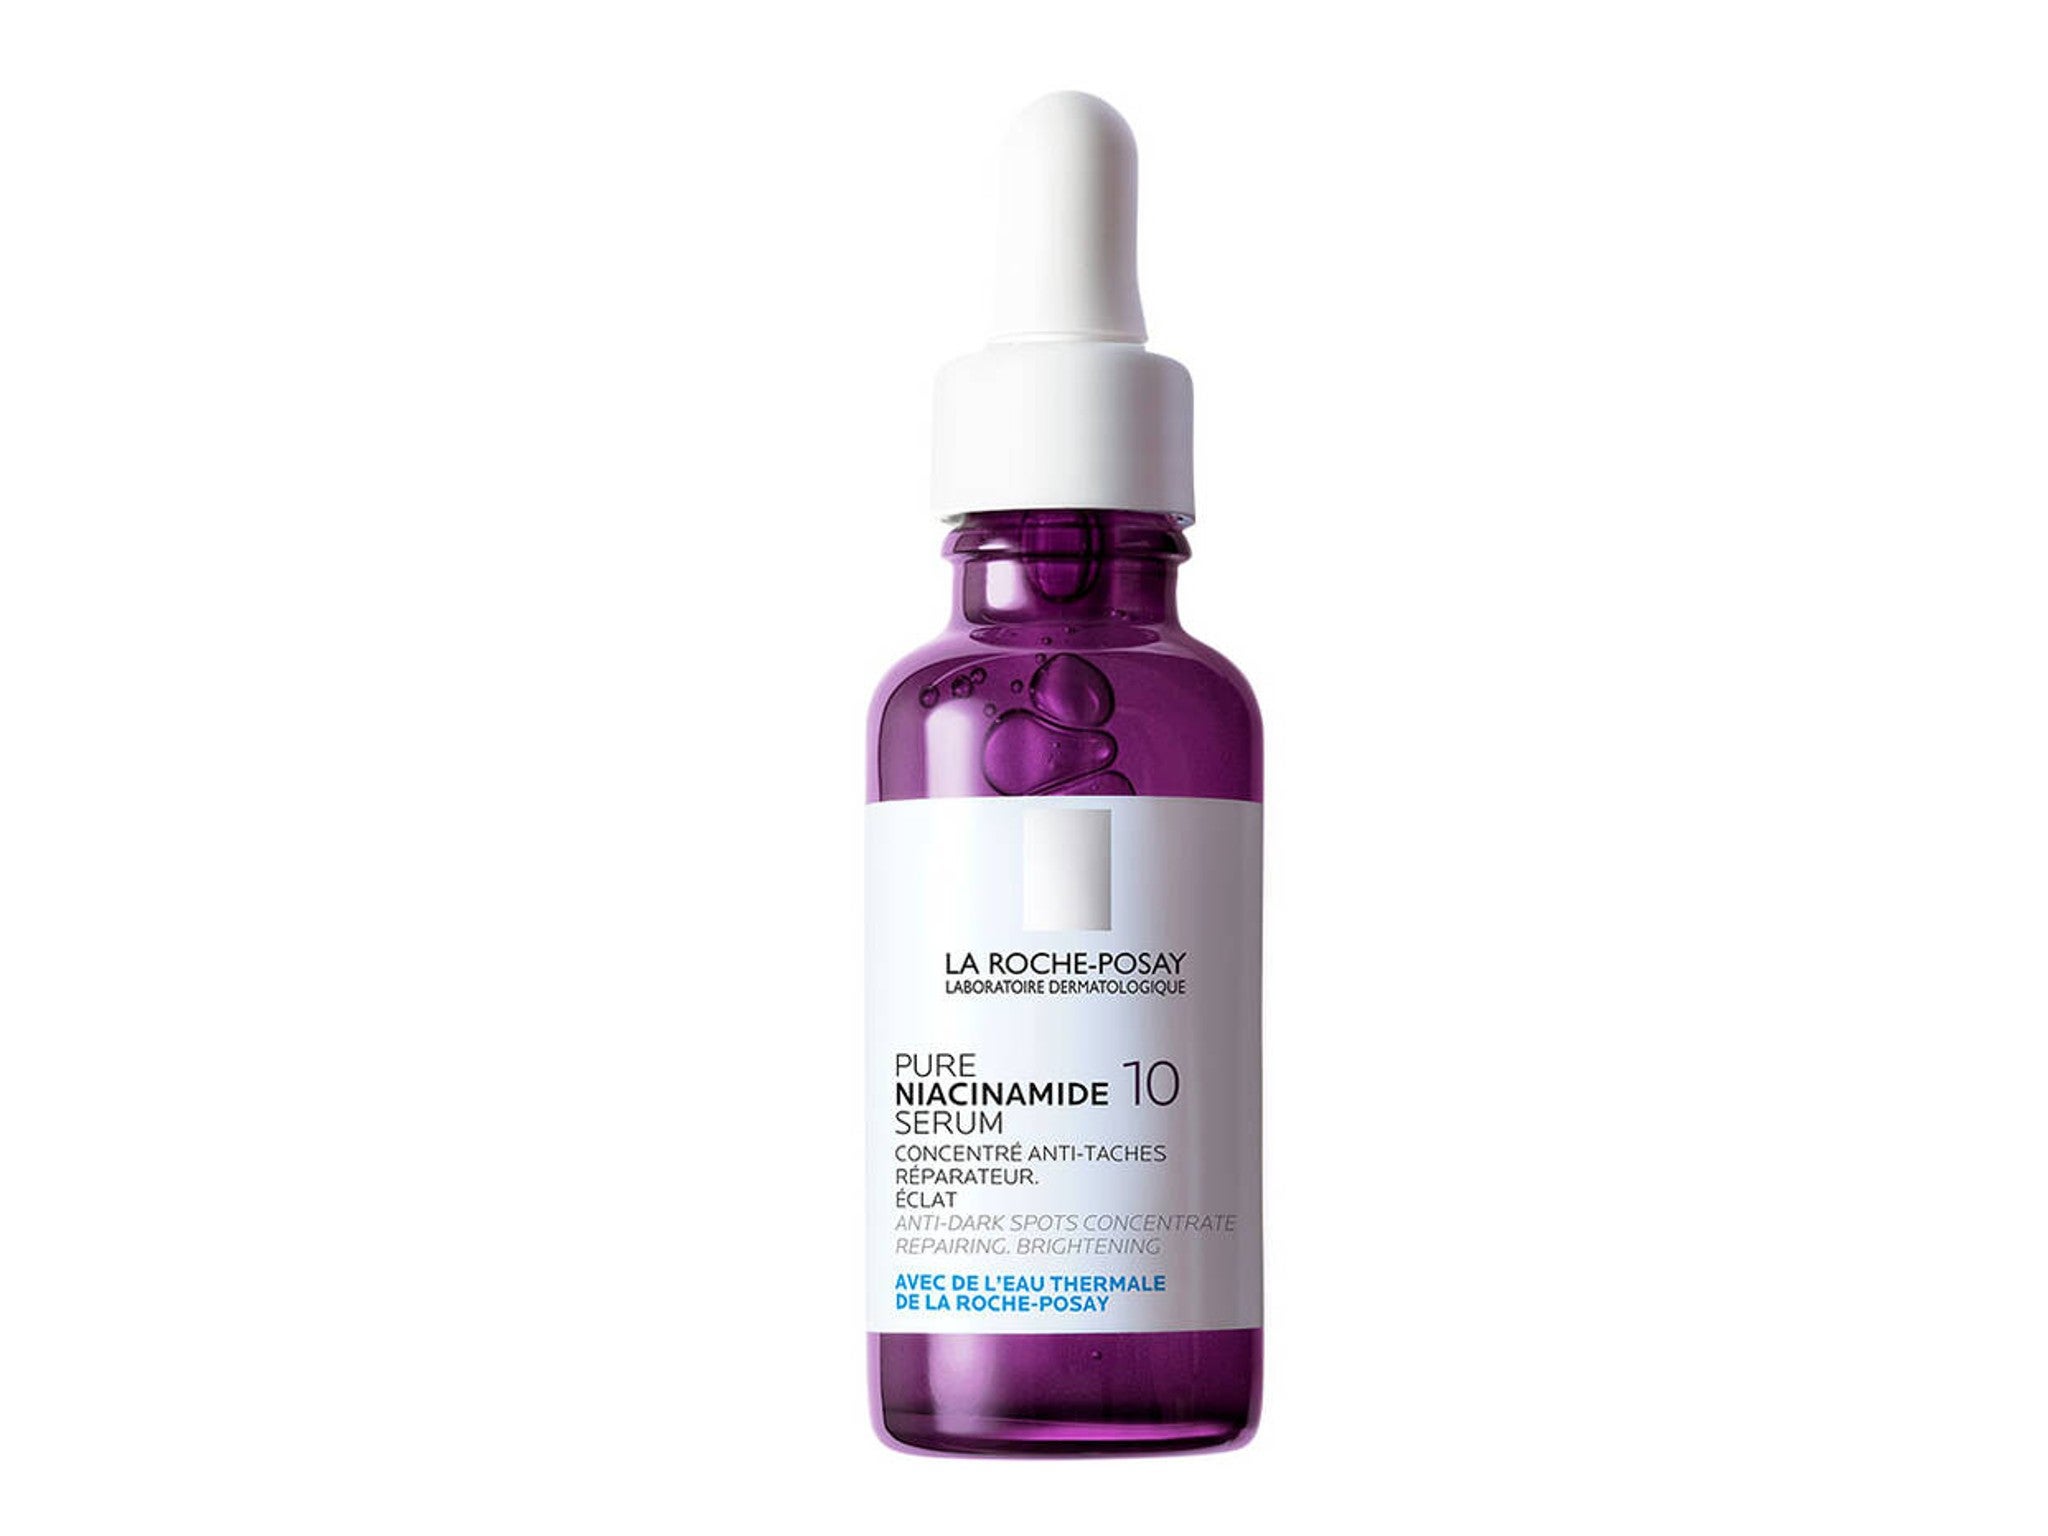 La Roche-Posay’s first ever niacinamide serum contains 10 per cent of this multi-purpose concentrate